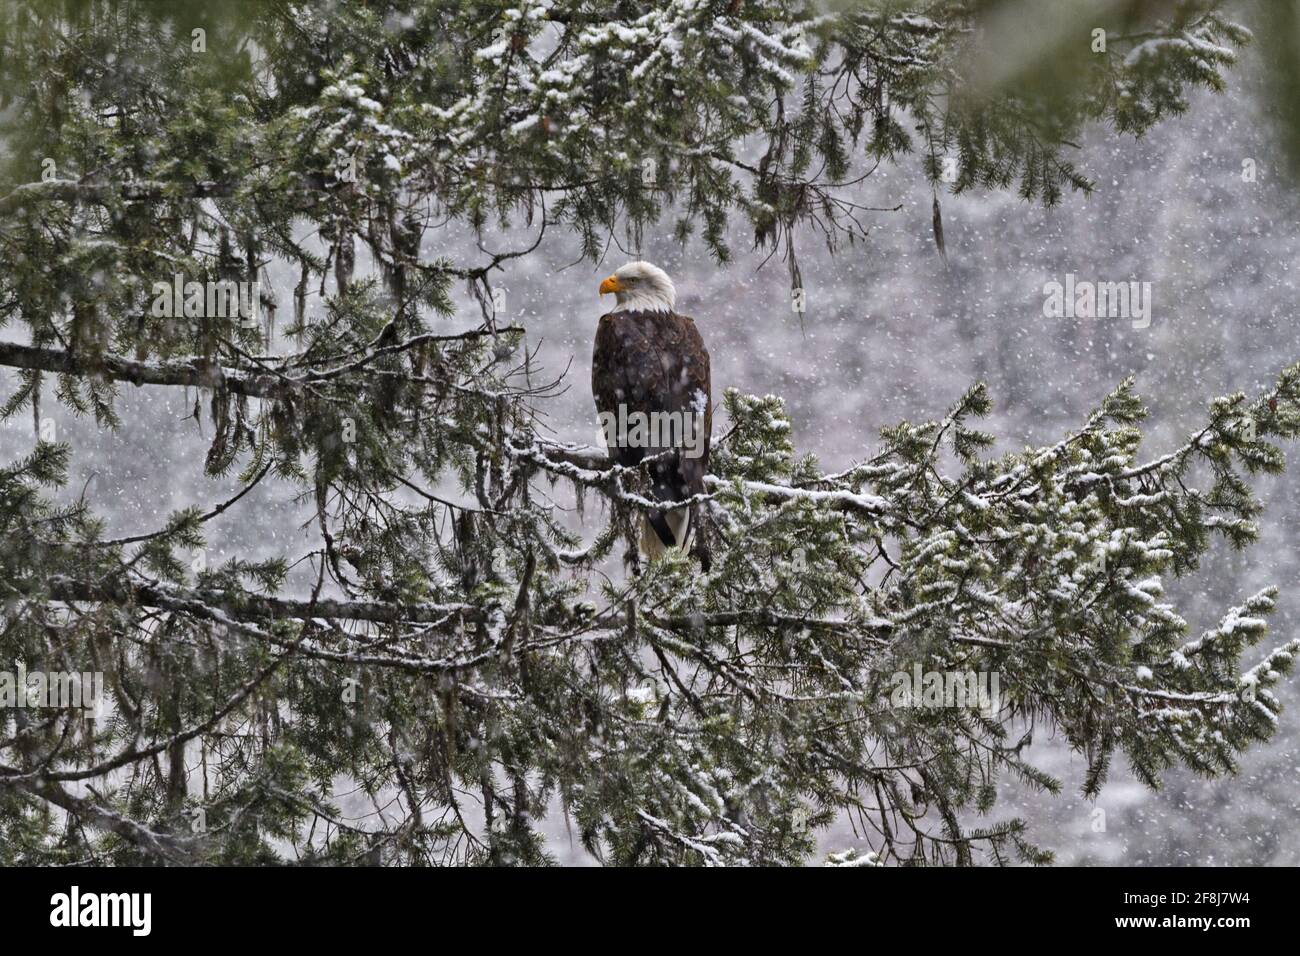 Horizontal format of perched bald eagle in snow storm at Lake Coeur d'Alene, second largest lake in northern Idaho in the American Pacific Northwest Stock Photo